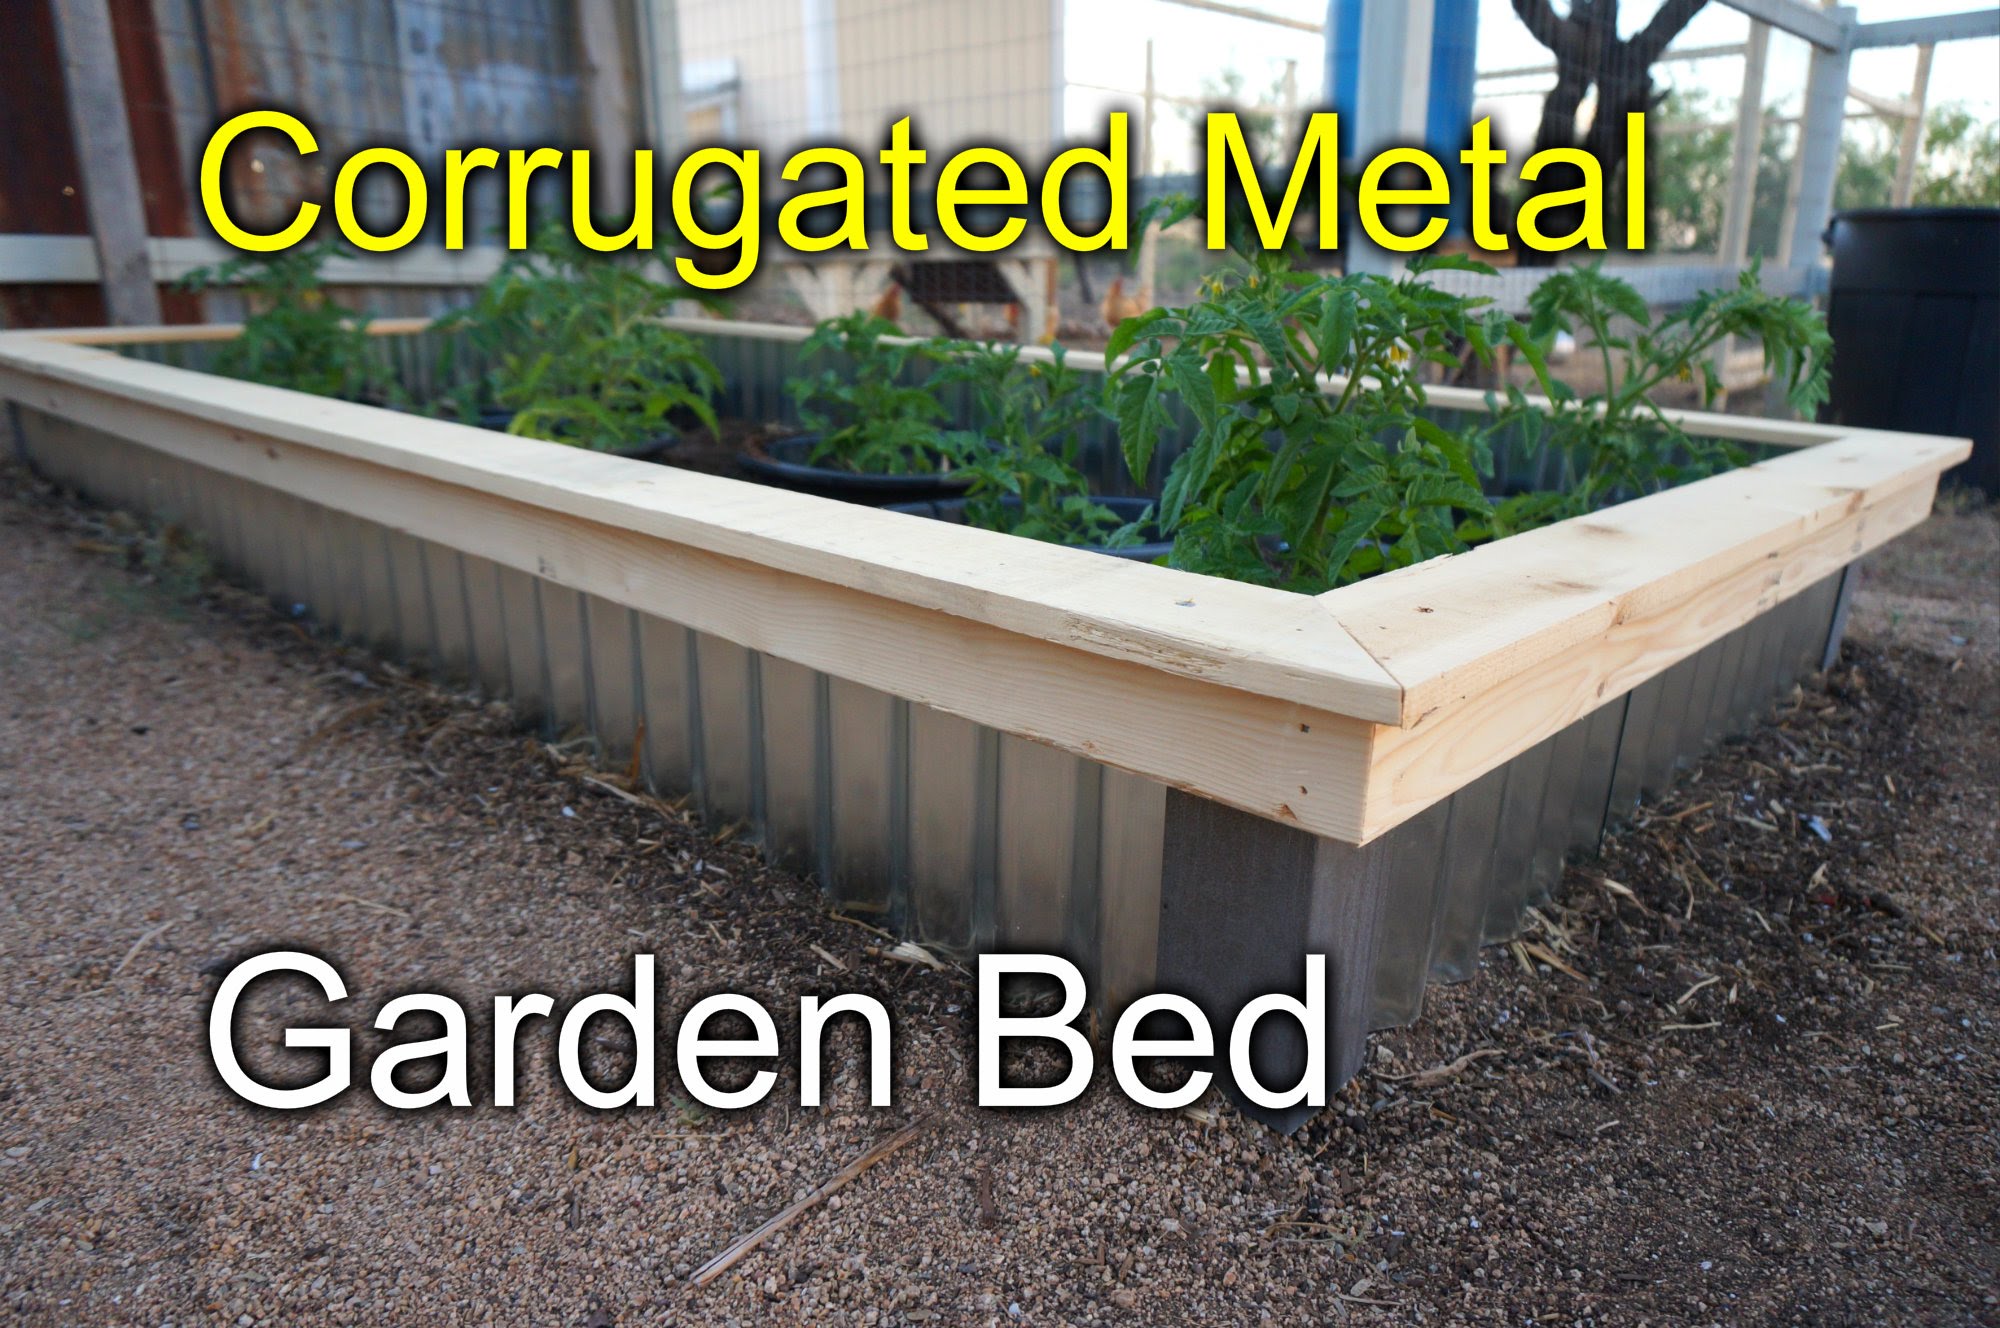 [Landscaping] DIY Corrugated Raised Bed Garden - Is It ...